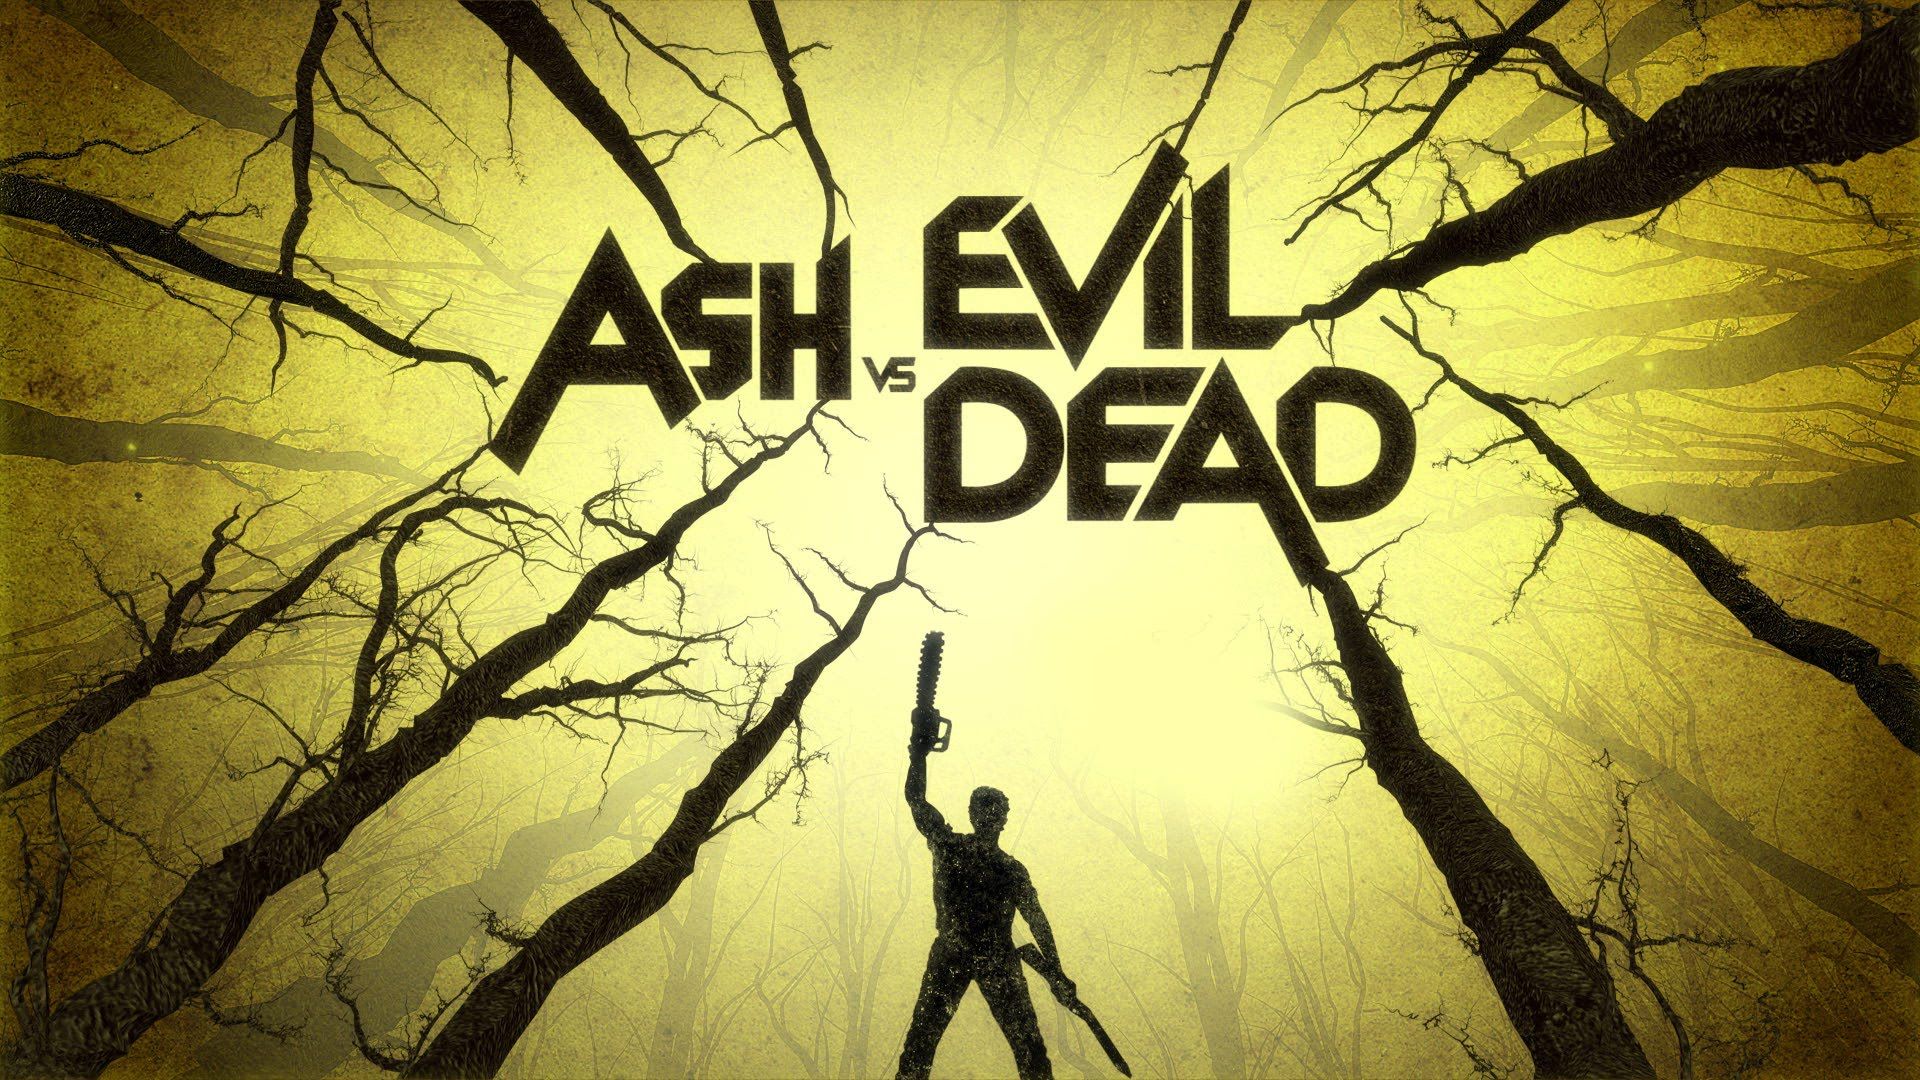 Ash vs. Evil Dead Wallpapers High Resolution and Quality Download